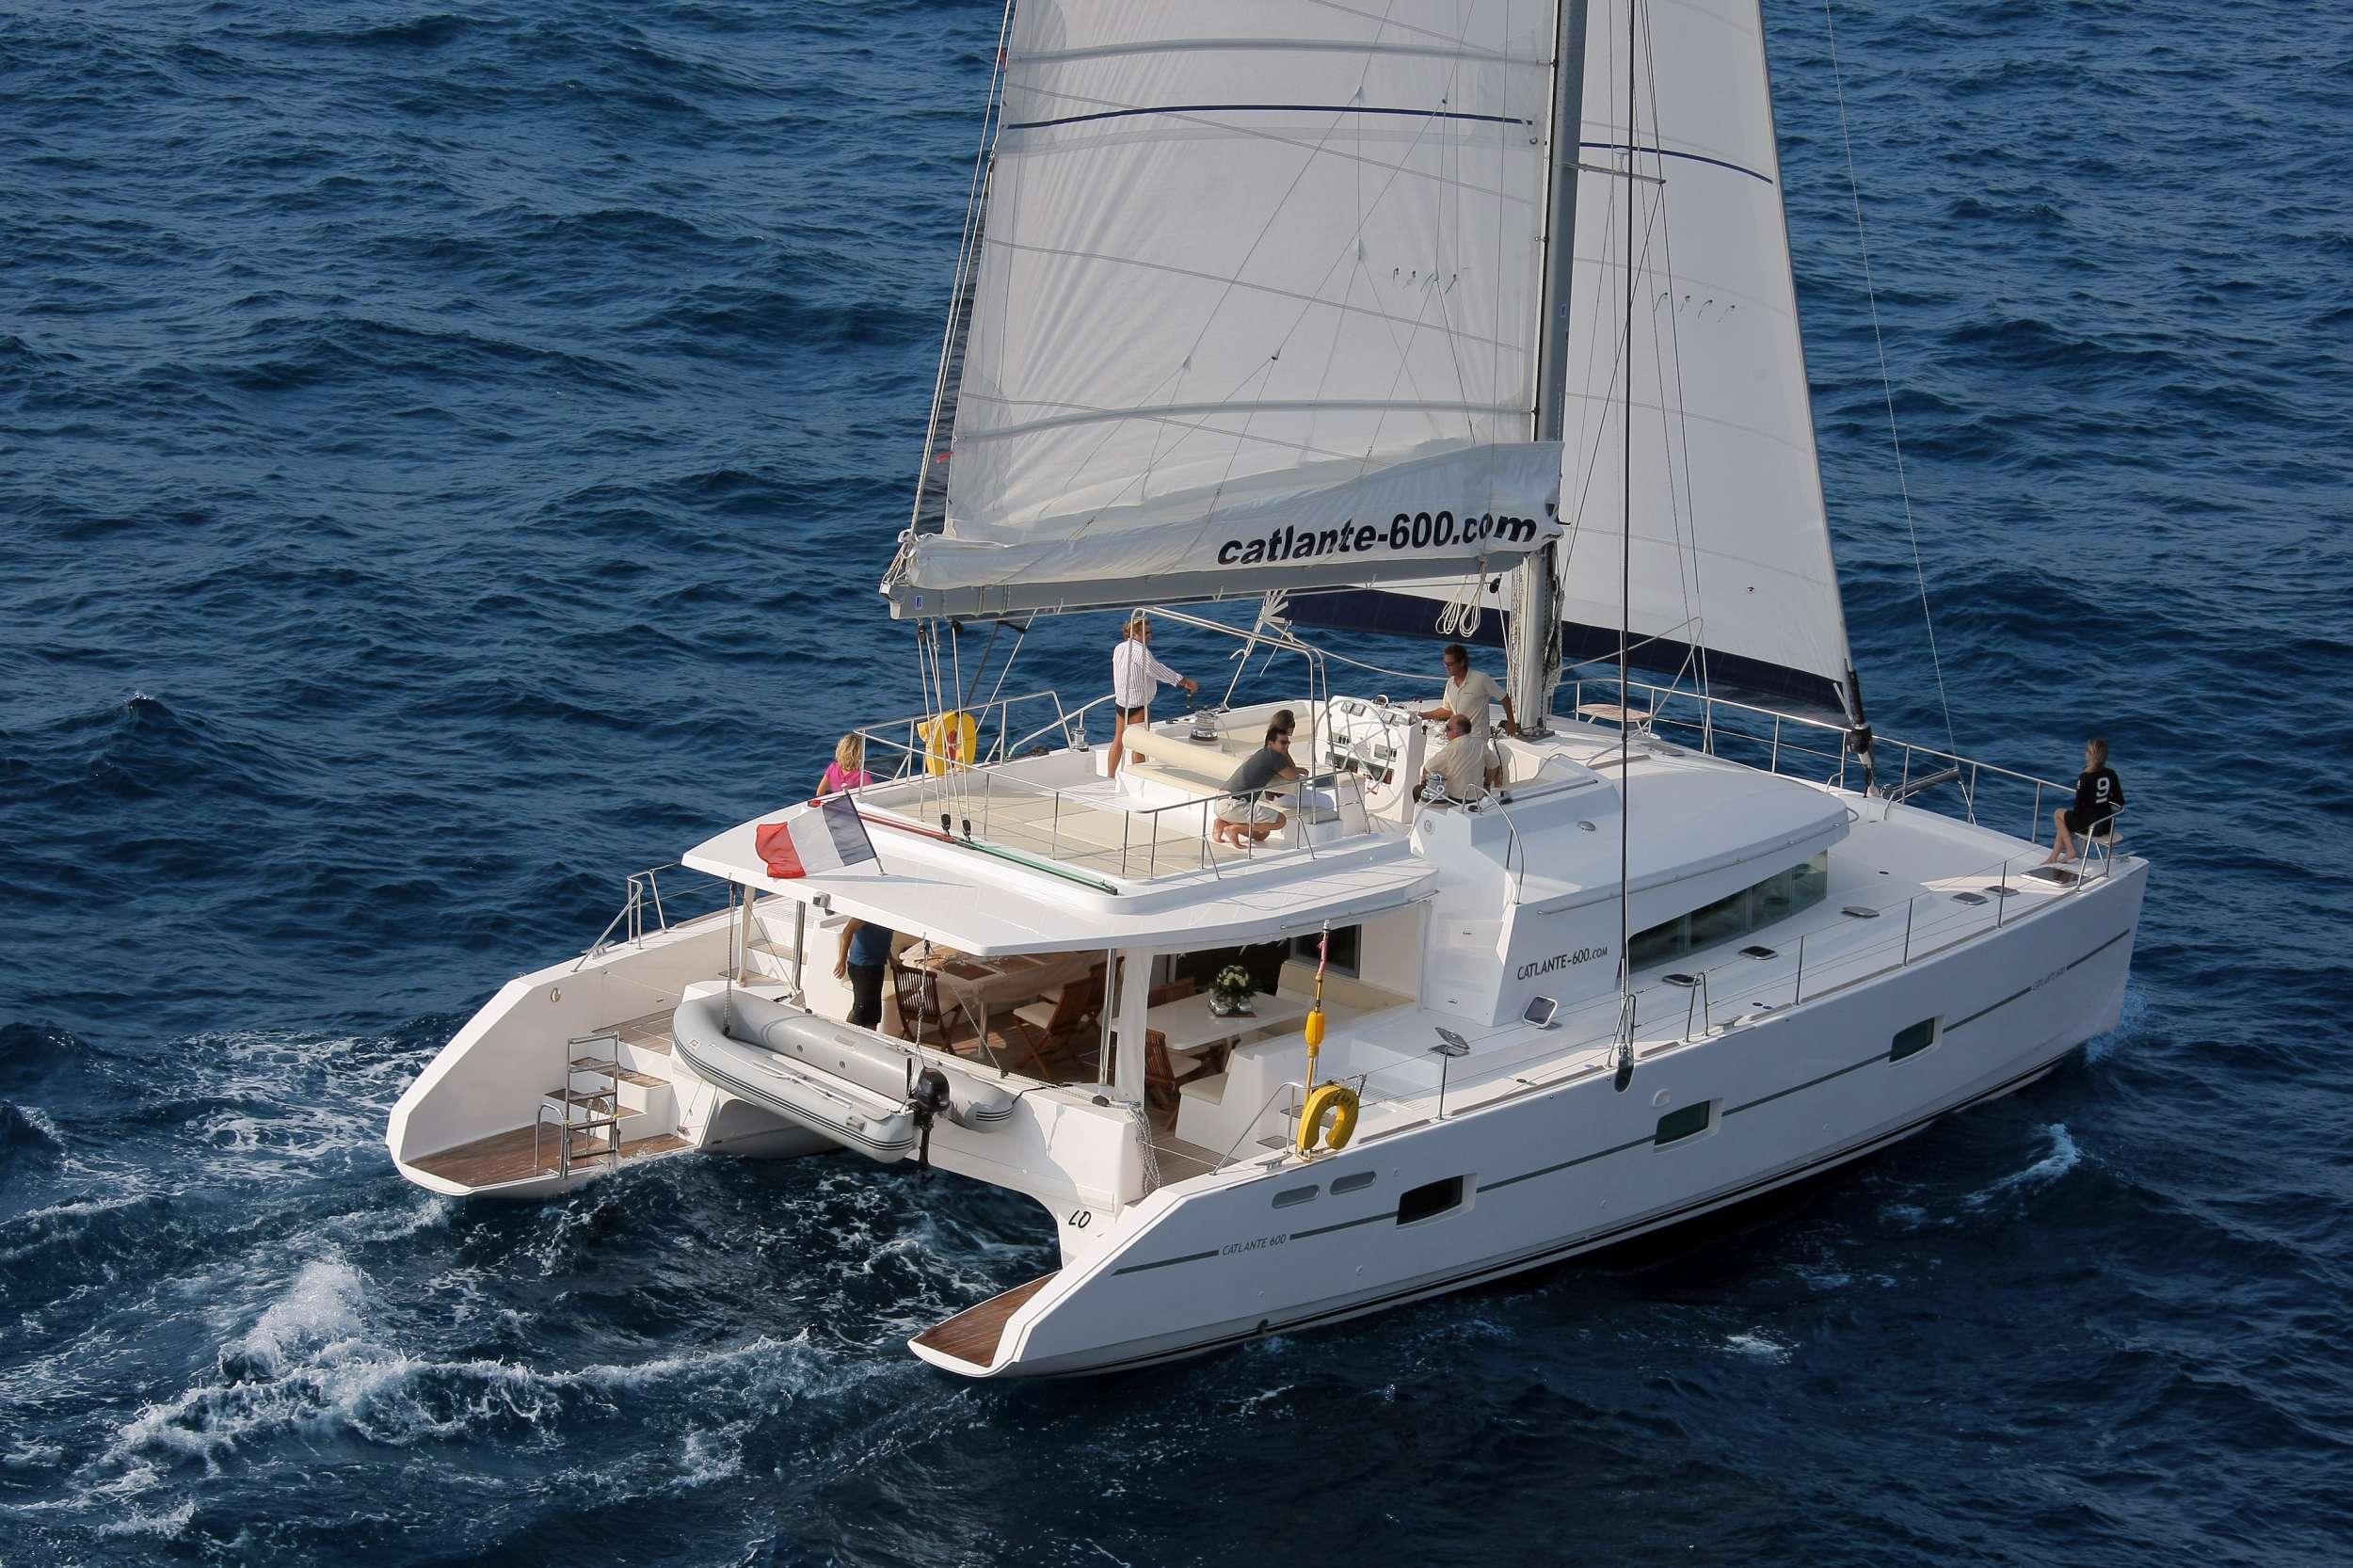 Dream 60 - Littr&eacute; &amp; Tauceti - Yacht Charter Malaysia & Boat hire in W. Med -Naples/Sicily, W. Med - Spain/Balearics, Croatia Bahamas, Indian Ocean and SE Asia 5